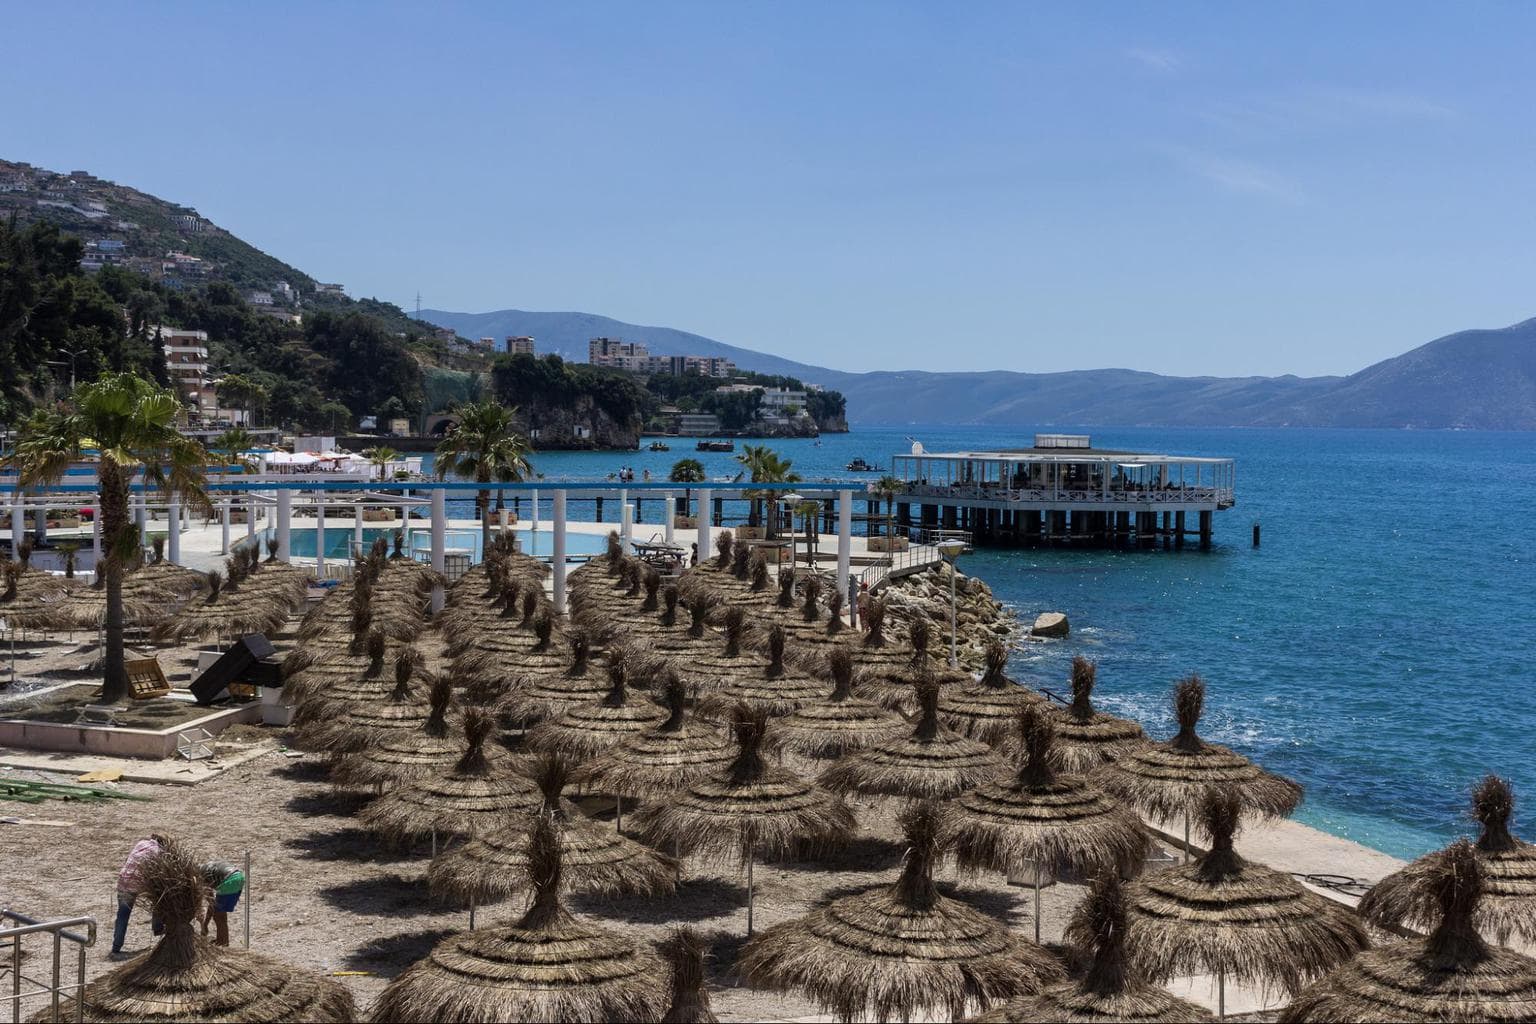 Vlore Beach - Photo by Leif Hinrichsen on Flickr BY CC-NC 2.0